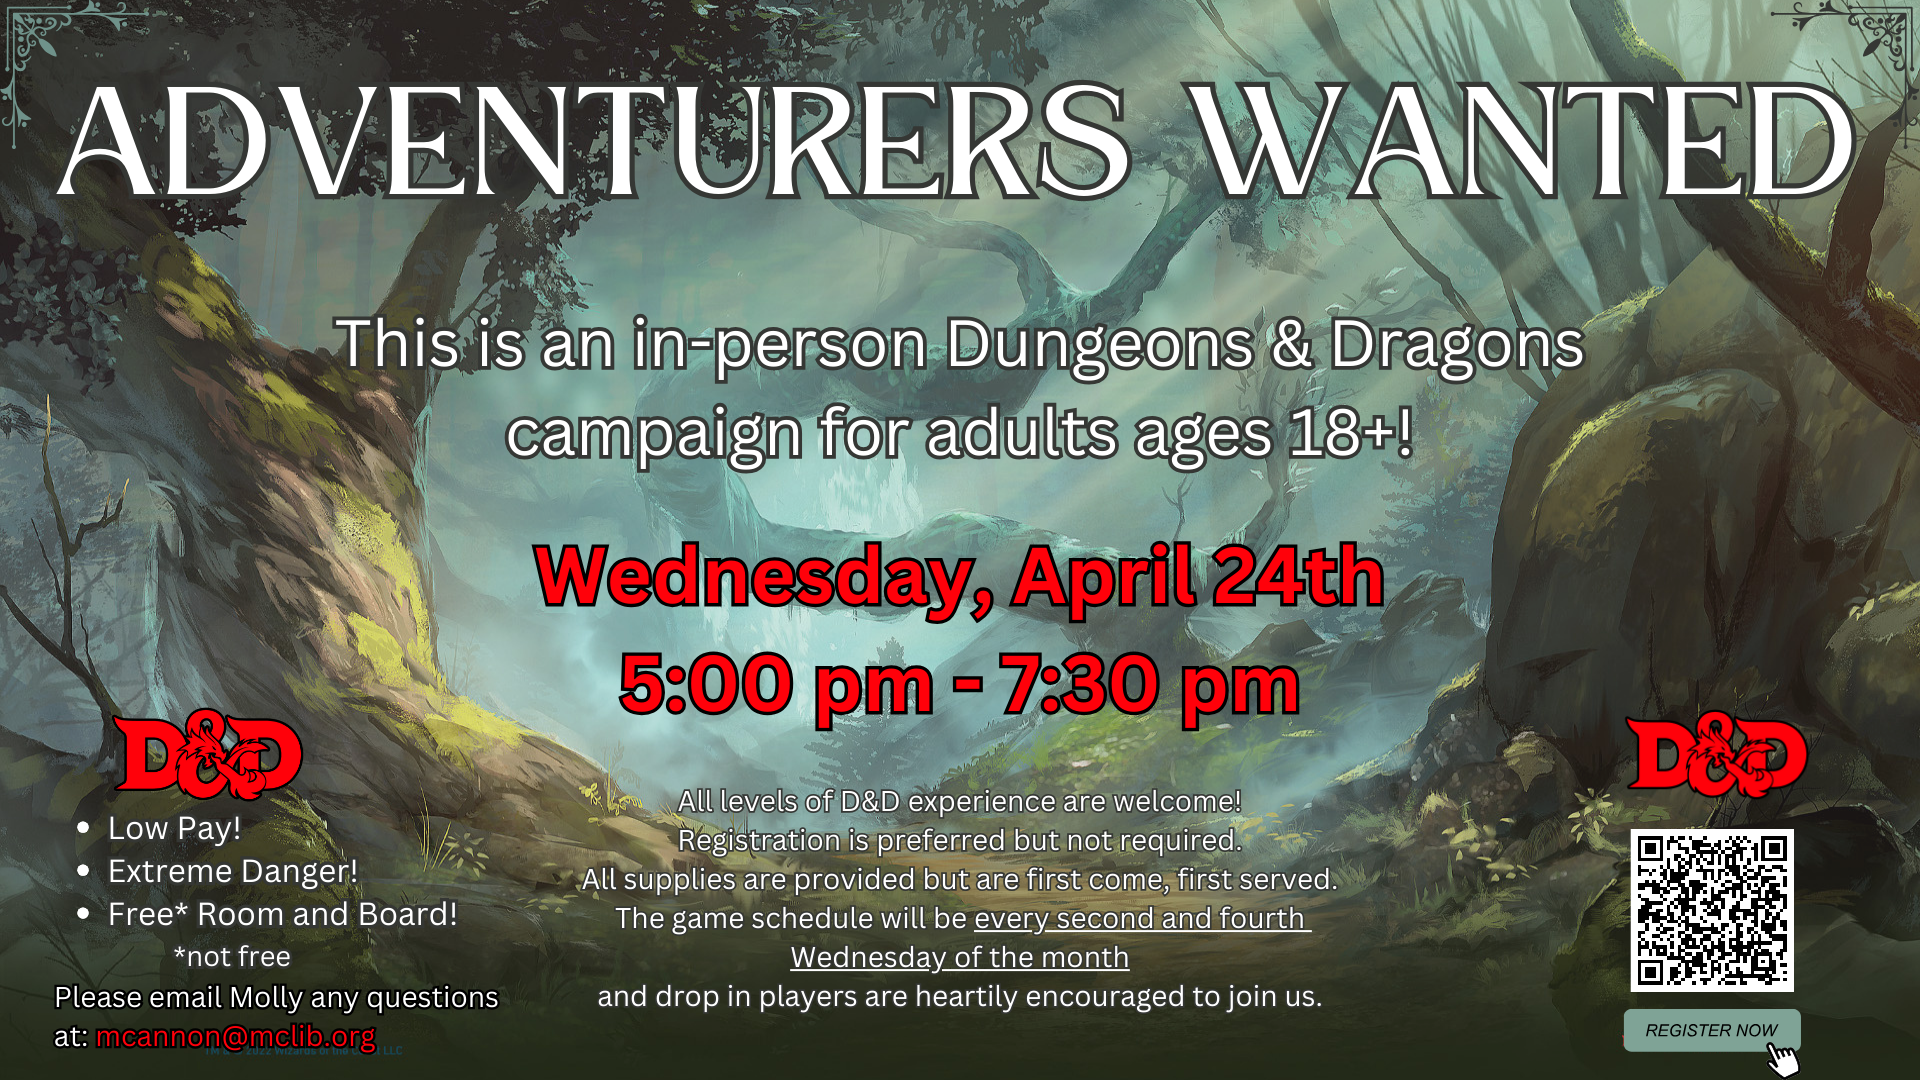 Adventurers wanted! Adult D&D, Wednesday, April 24, 5-7:30 pm